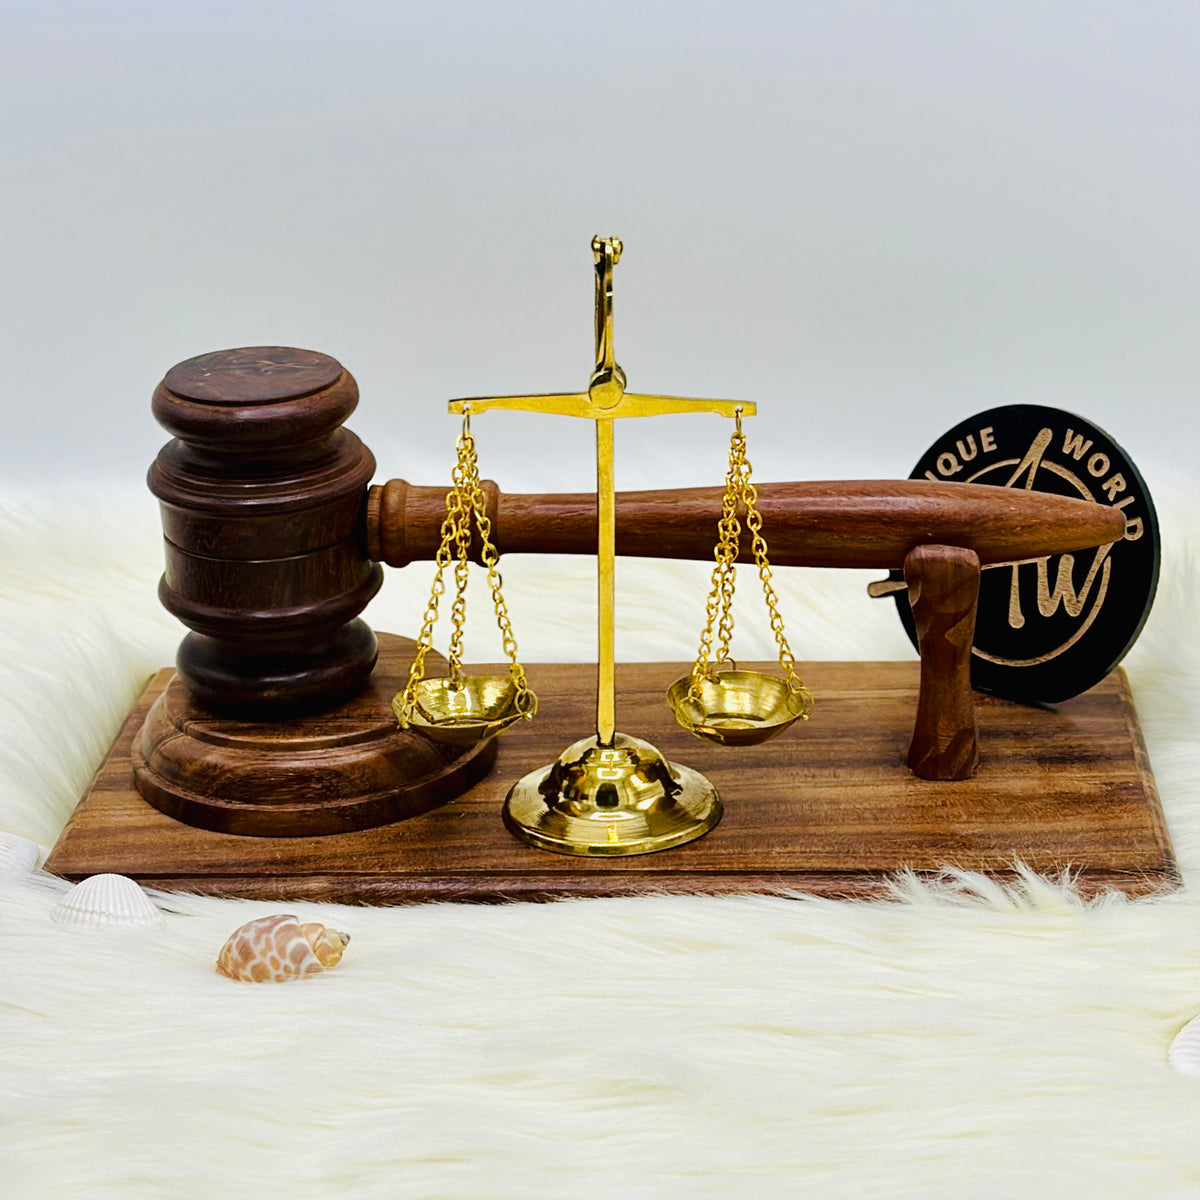 Royal Justice Scale & Gavel